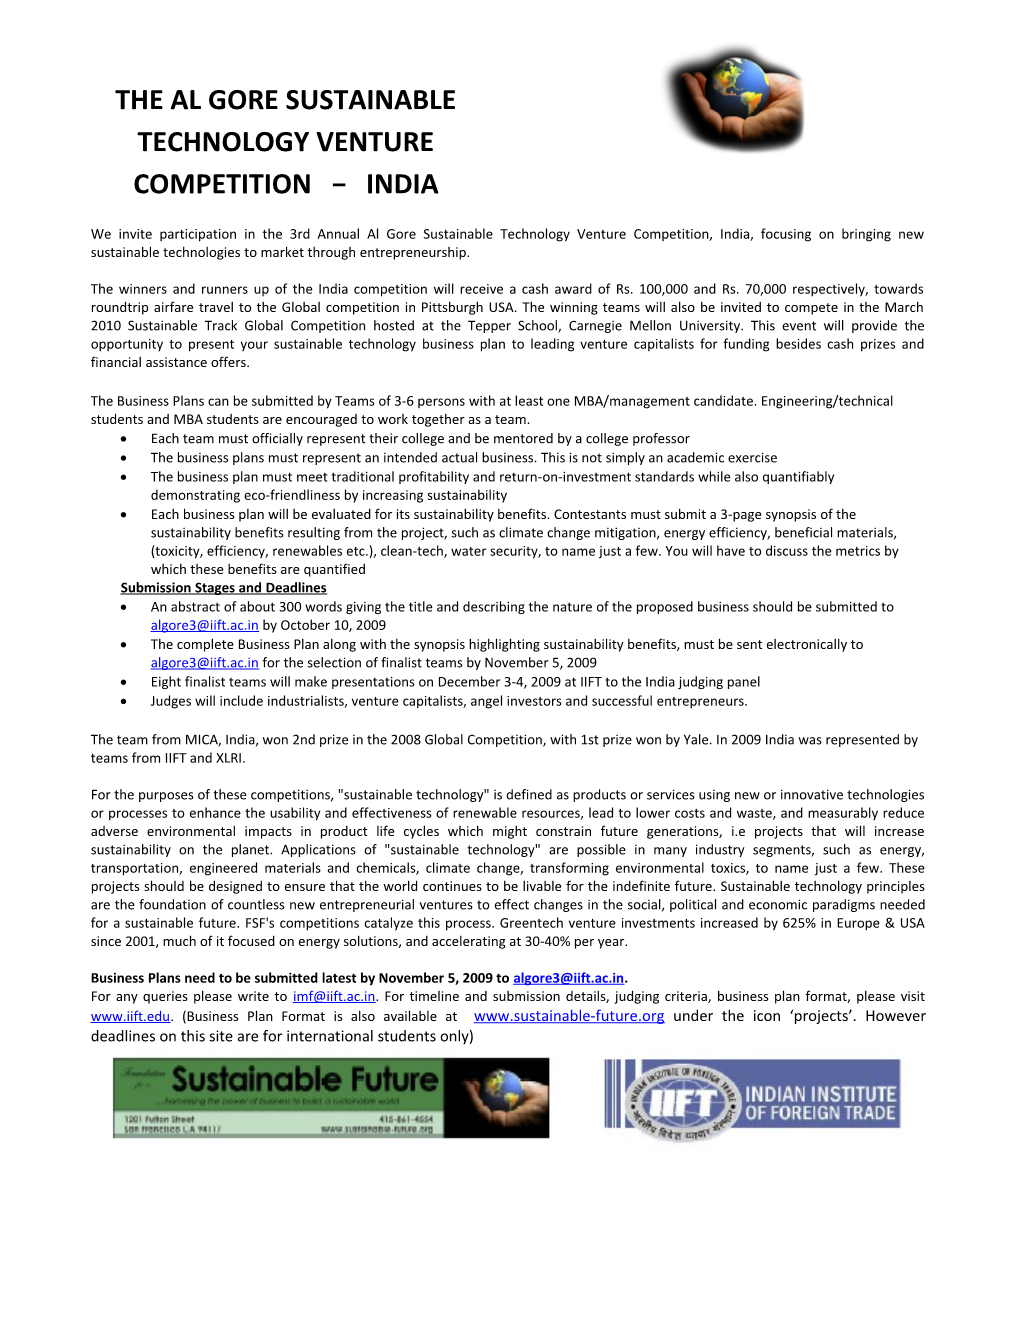 The Al Gore Sustainable Technology Venture Competition - India